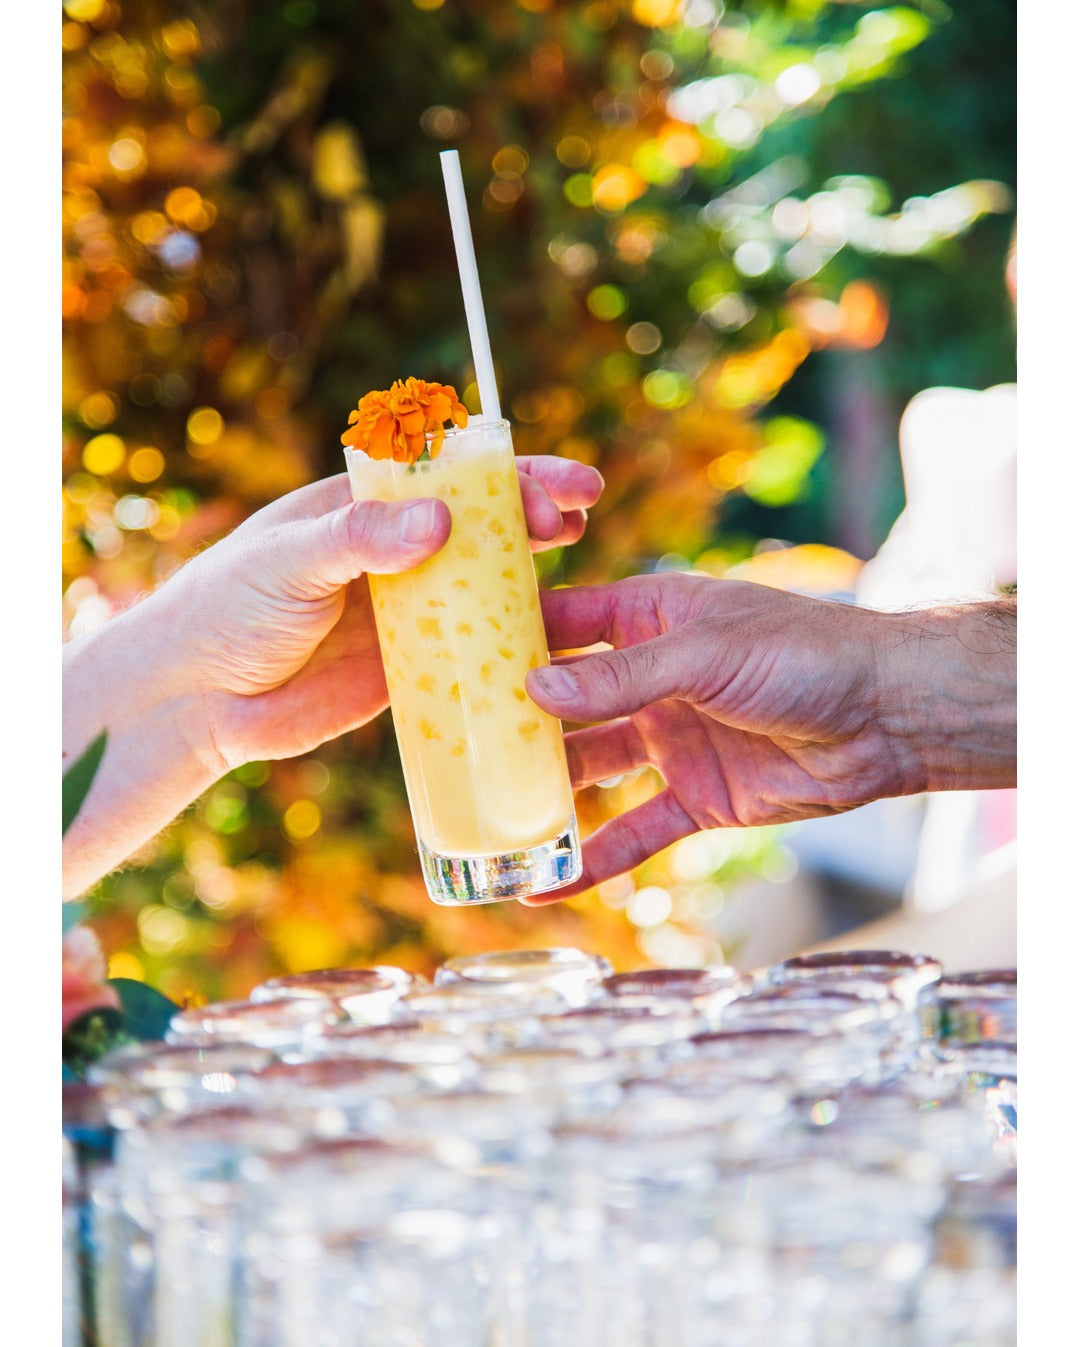 Cocktail drink being handed to a guest, from the craft mobile cocktail catering bar installation service.